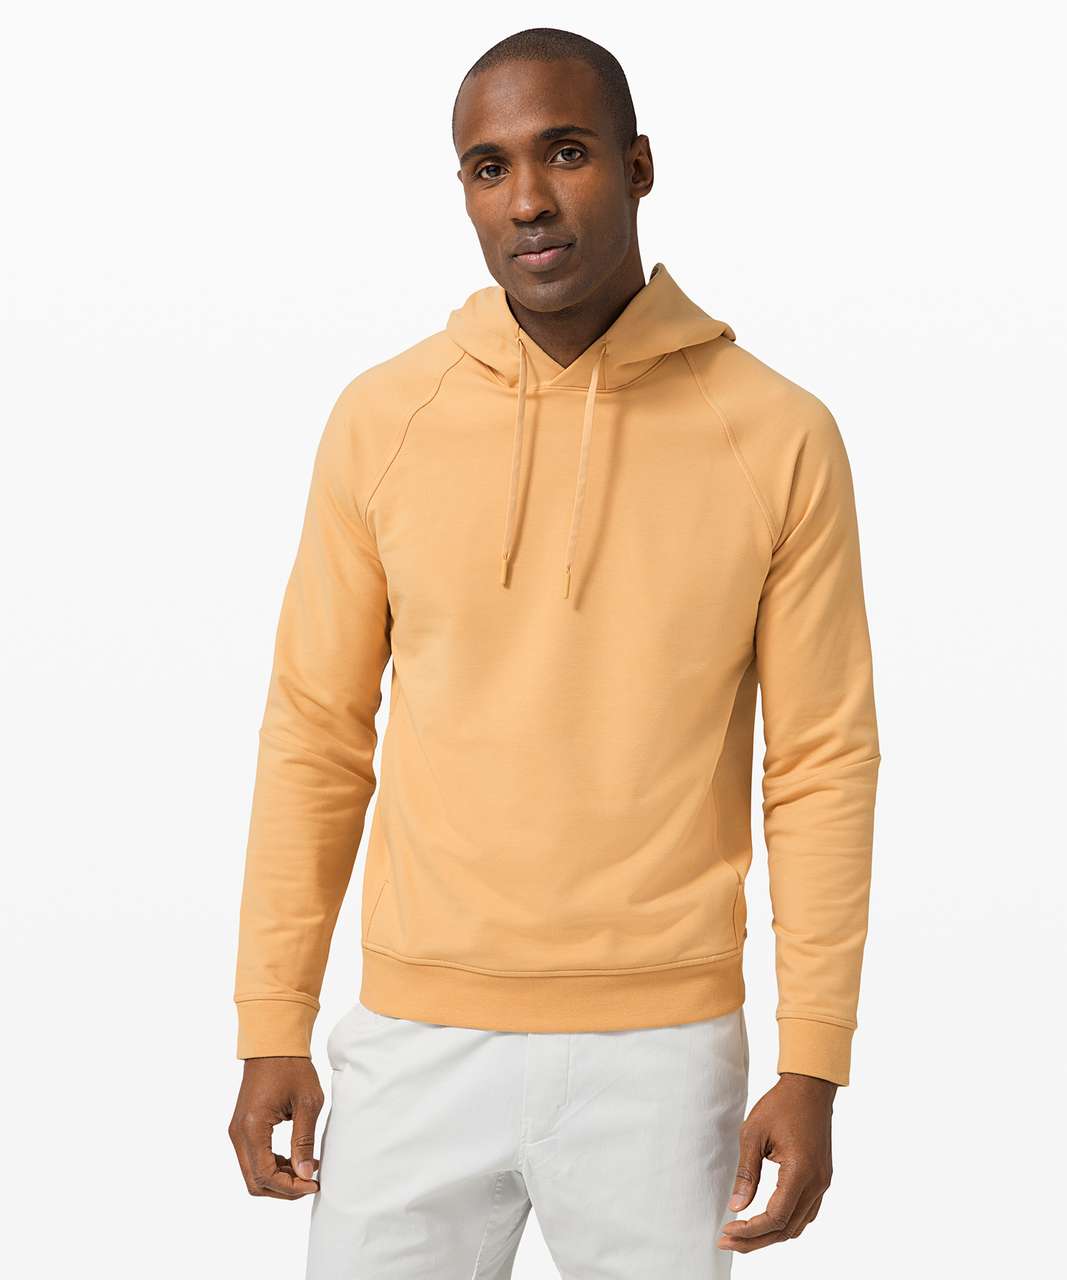 Lululemon City Sweat Pullover Hoodie French Terry - Beeswax